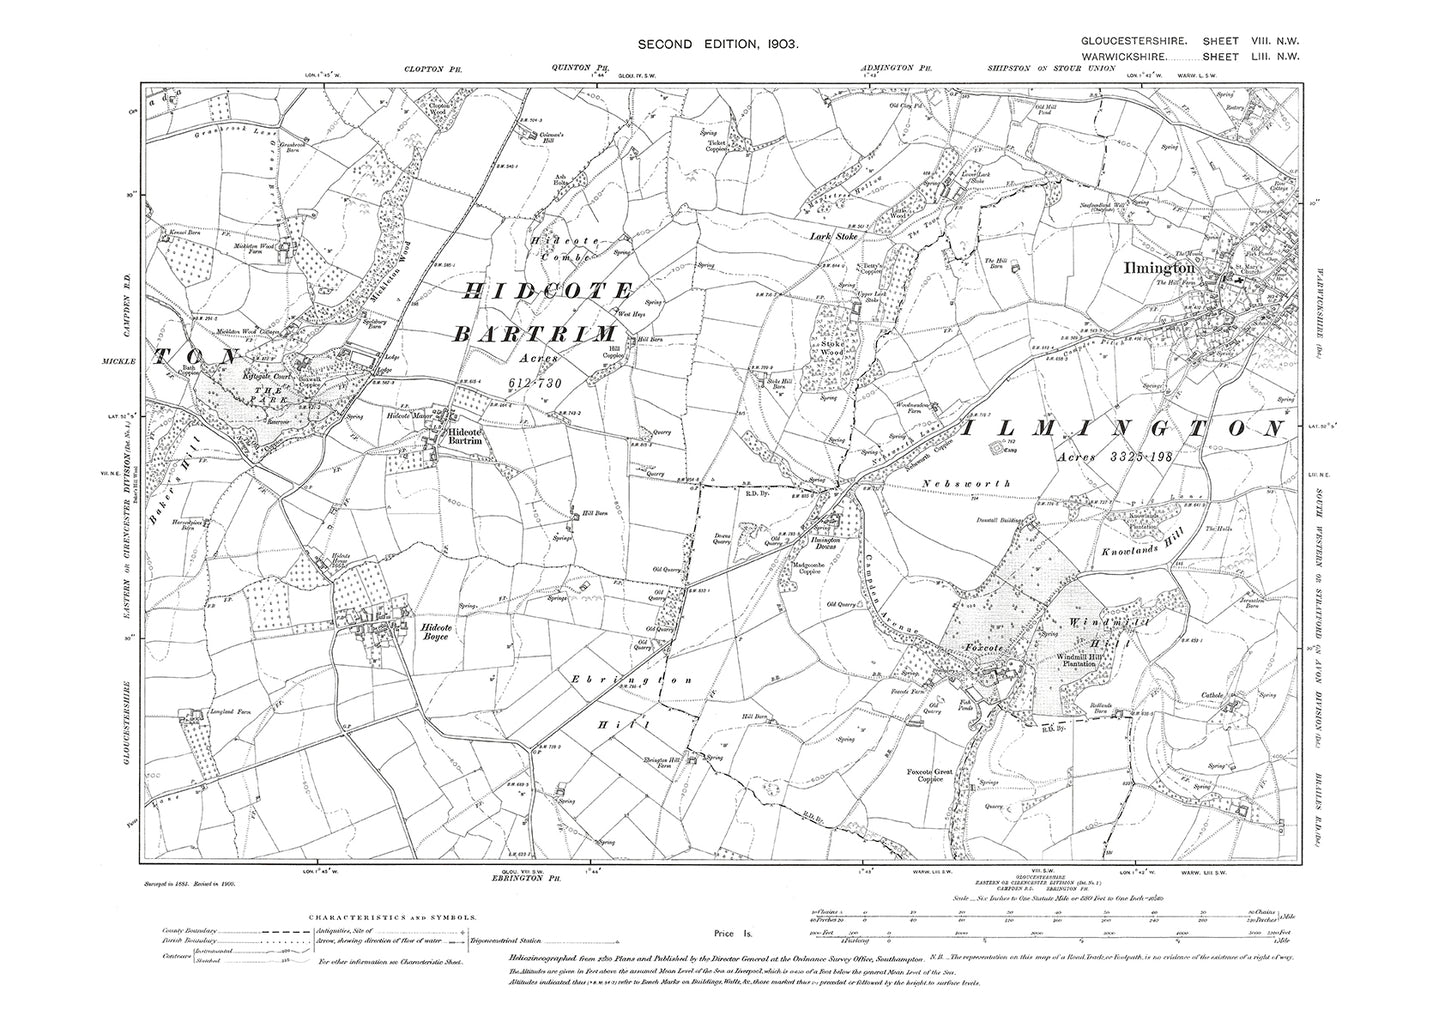 Old OS map dated 1903, showing Hidcote Bartrim, Hidcote Boyce in Gloucestershire - 8NW